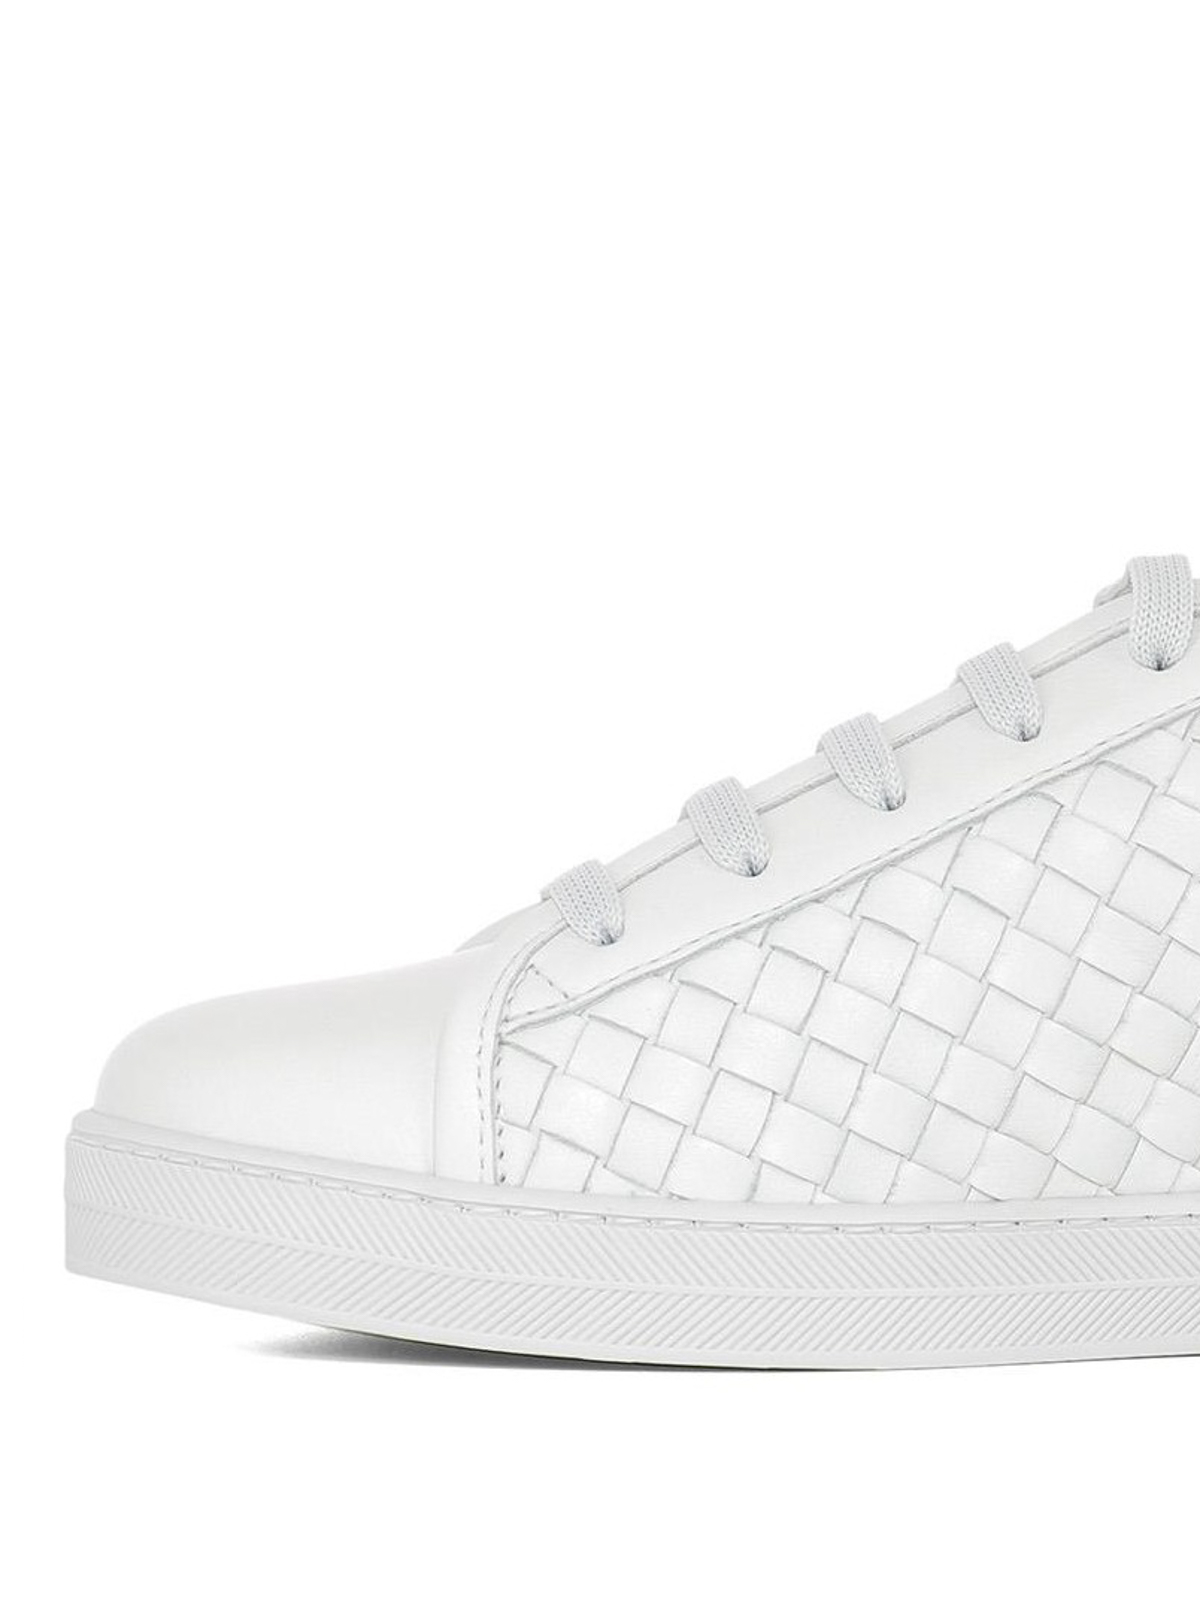 woven leather sneakers